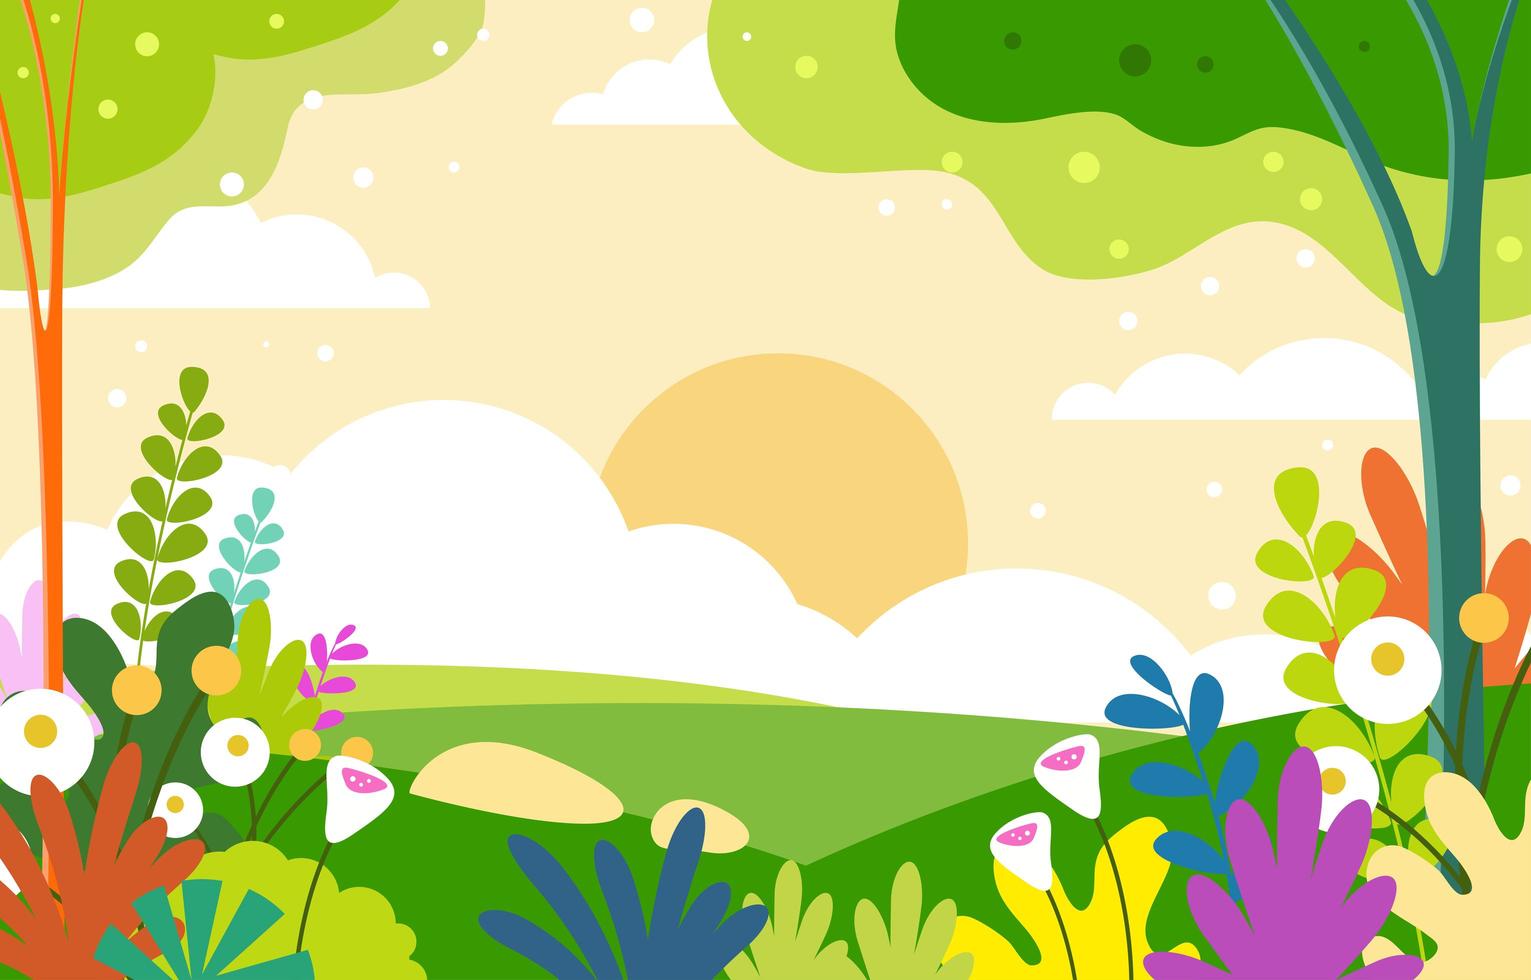 Spring with Landscape Background vector